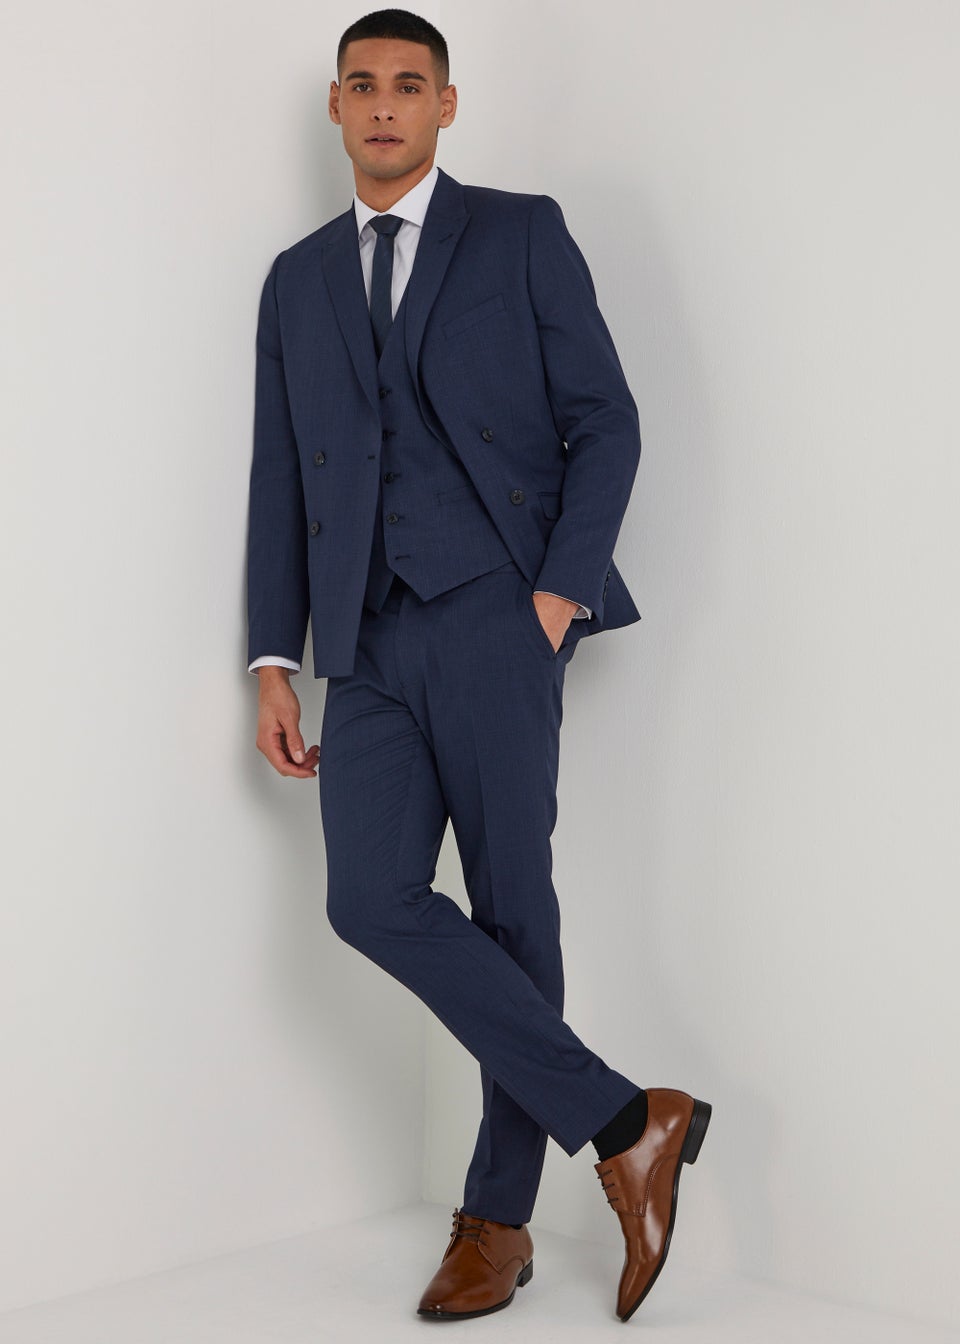 Taylor & Wright Cooper Navy Skinny Fit Suit Jacket